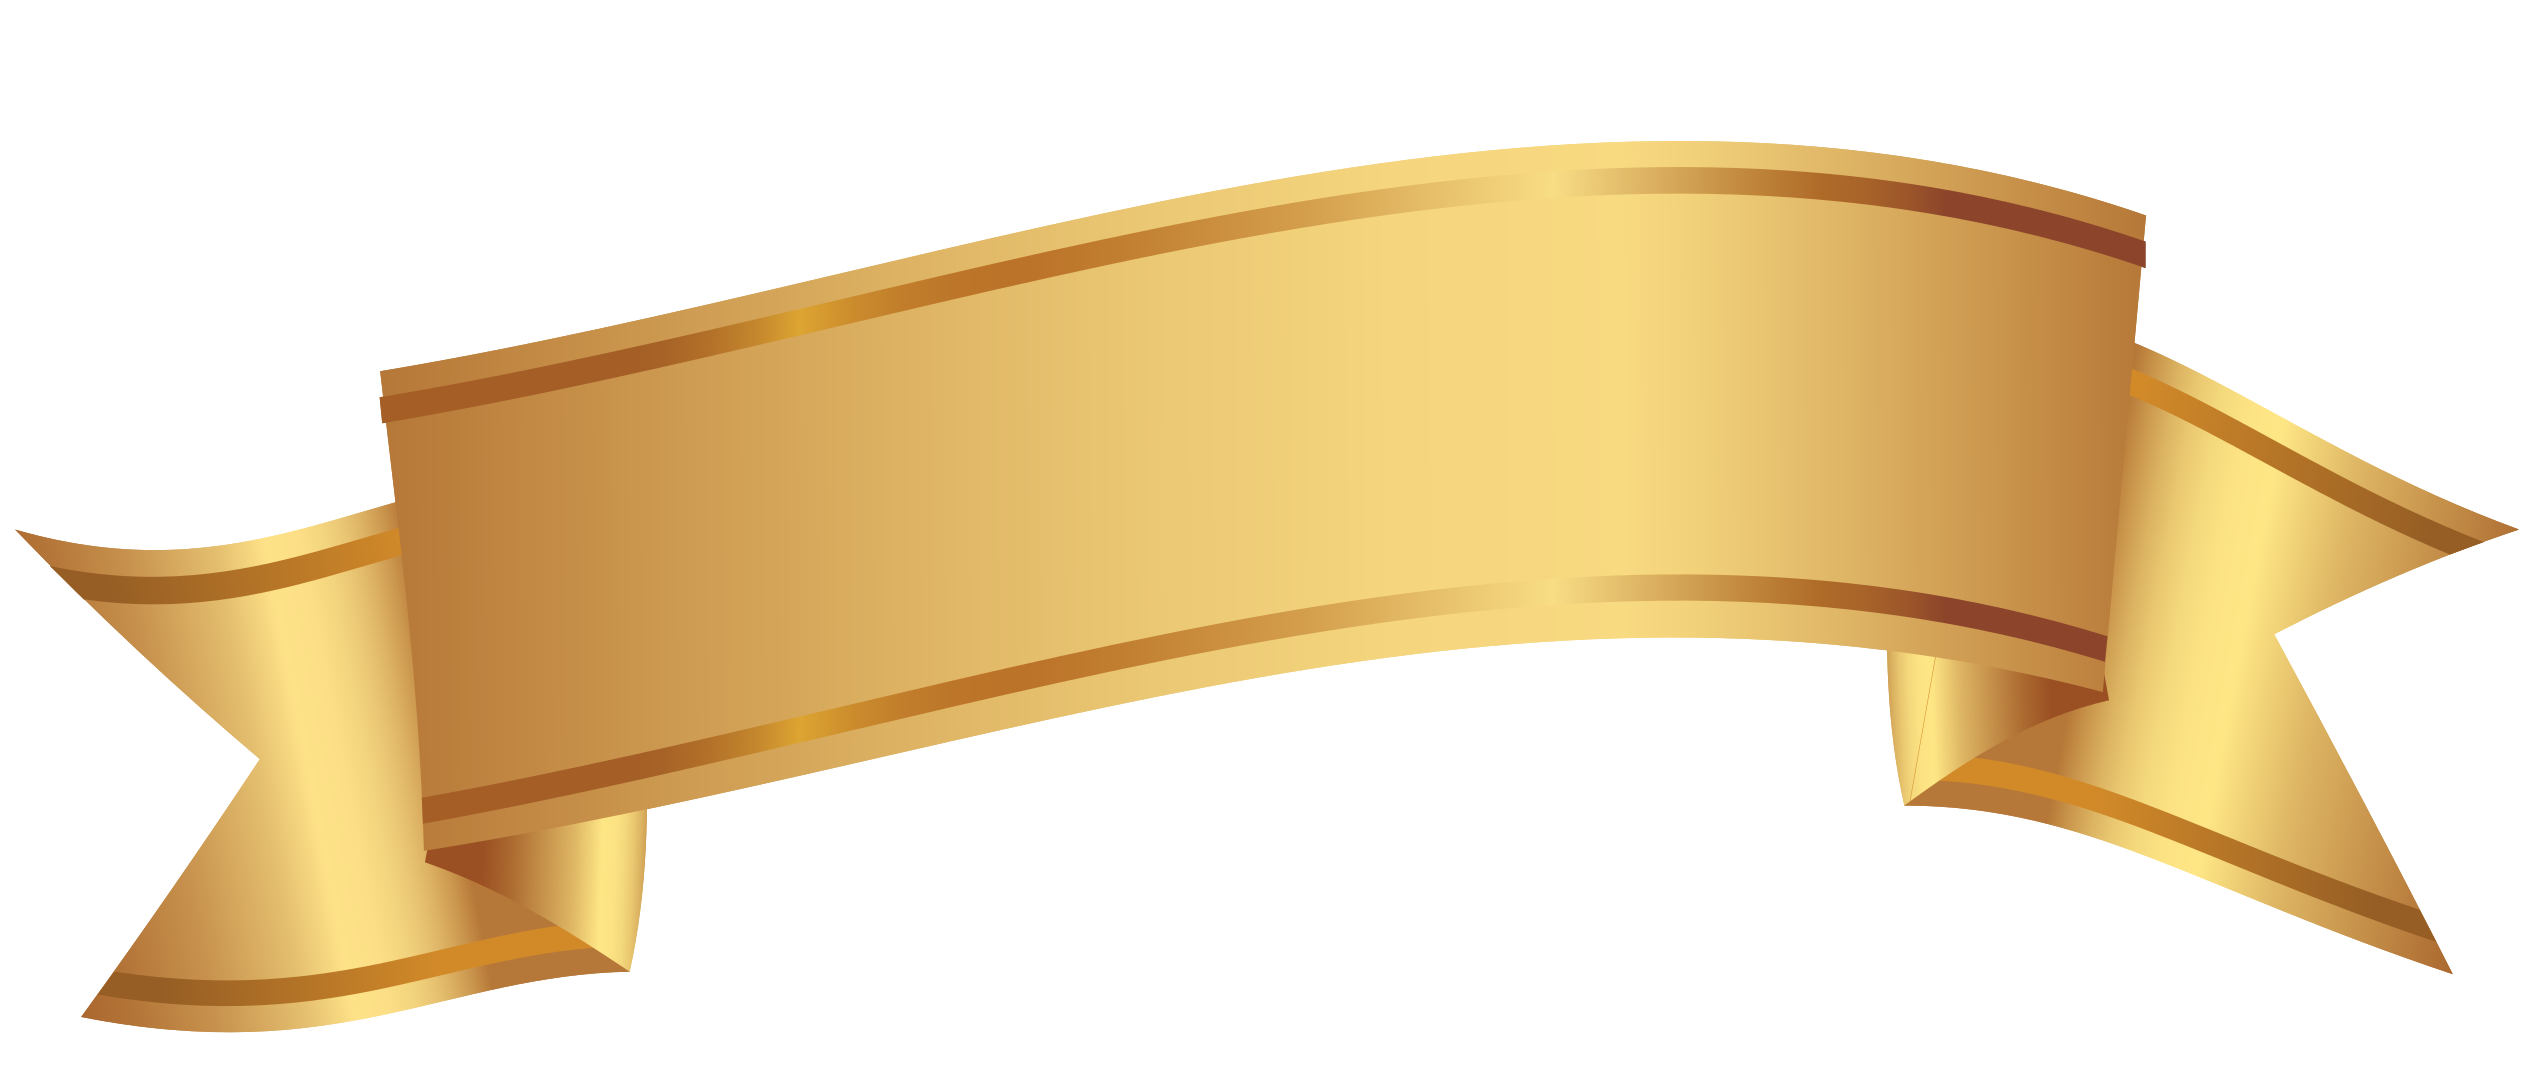 Free Golden decorative banner PNG with Transparent Background